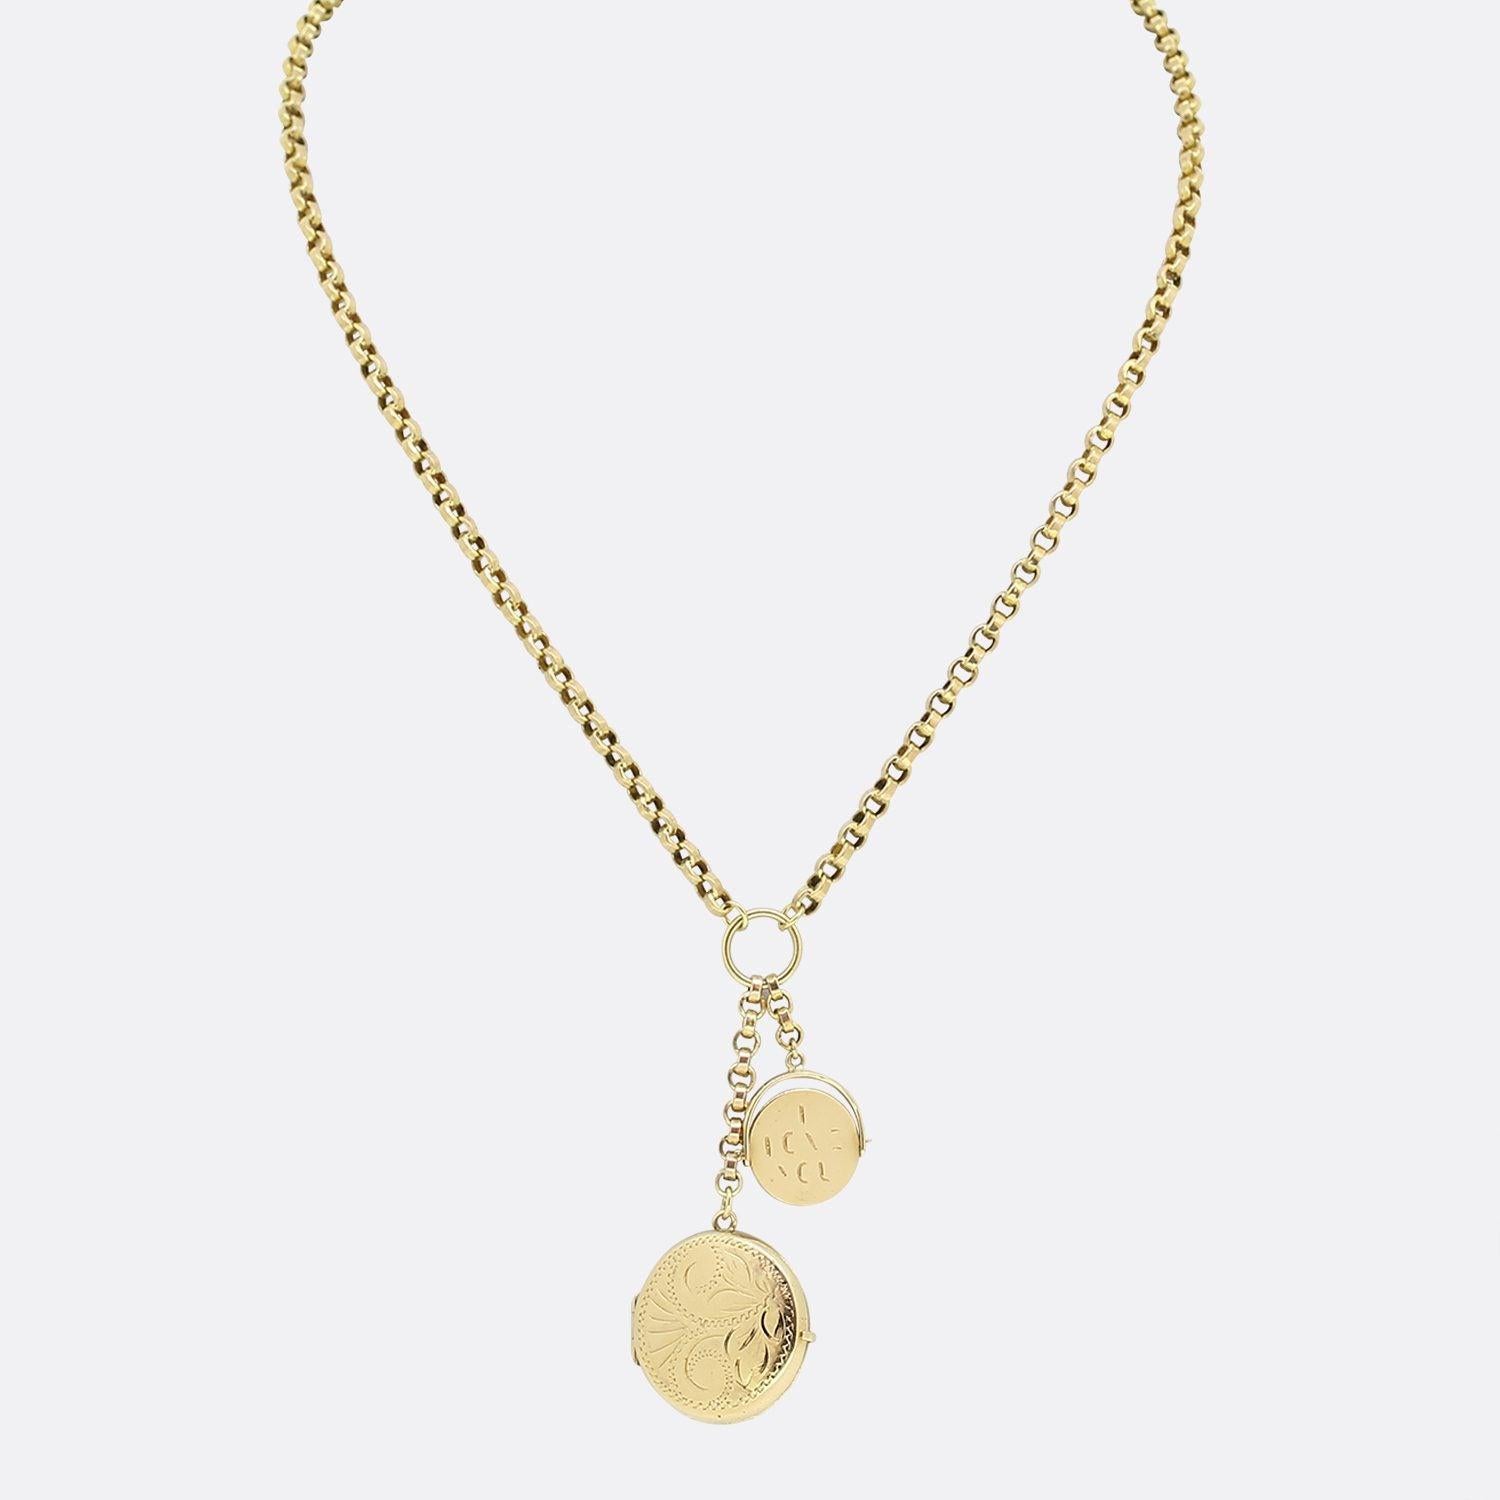 This is a vintage 9ct yellow gold belcher charm necklace. The necklace has a locket and an 'I Love You' spinner pendant which are suspended on decorative belcher link chains. The necklace is secured by an antique barrel clasp. The locket can be